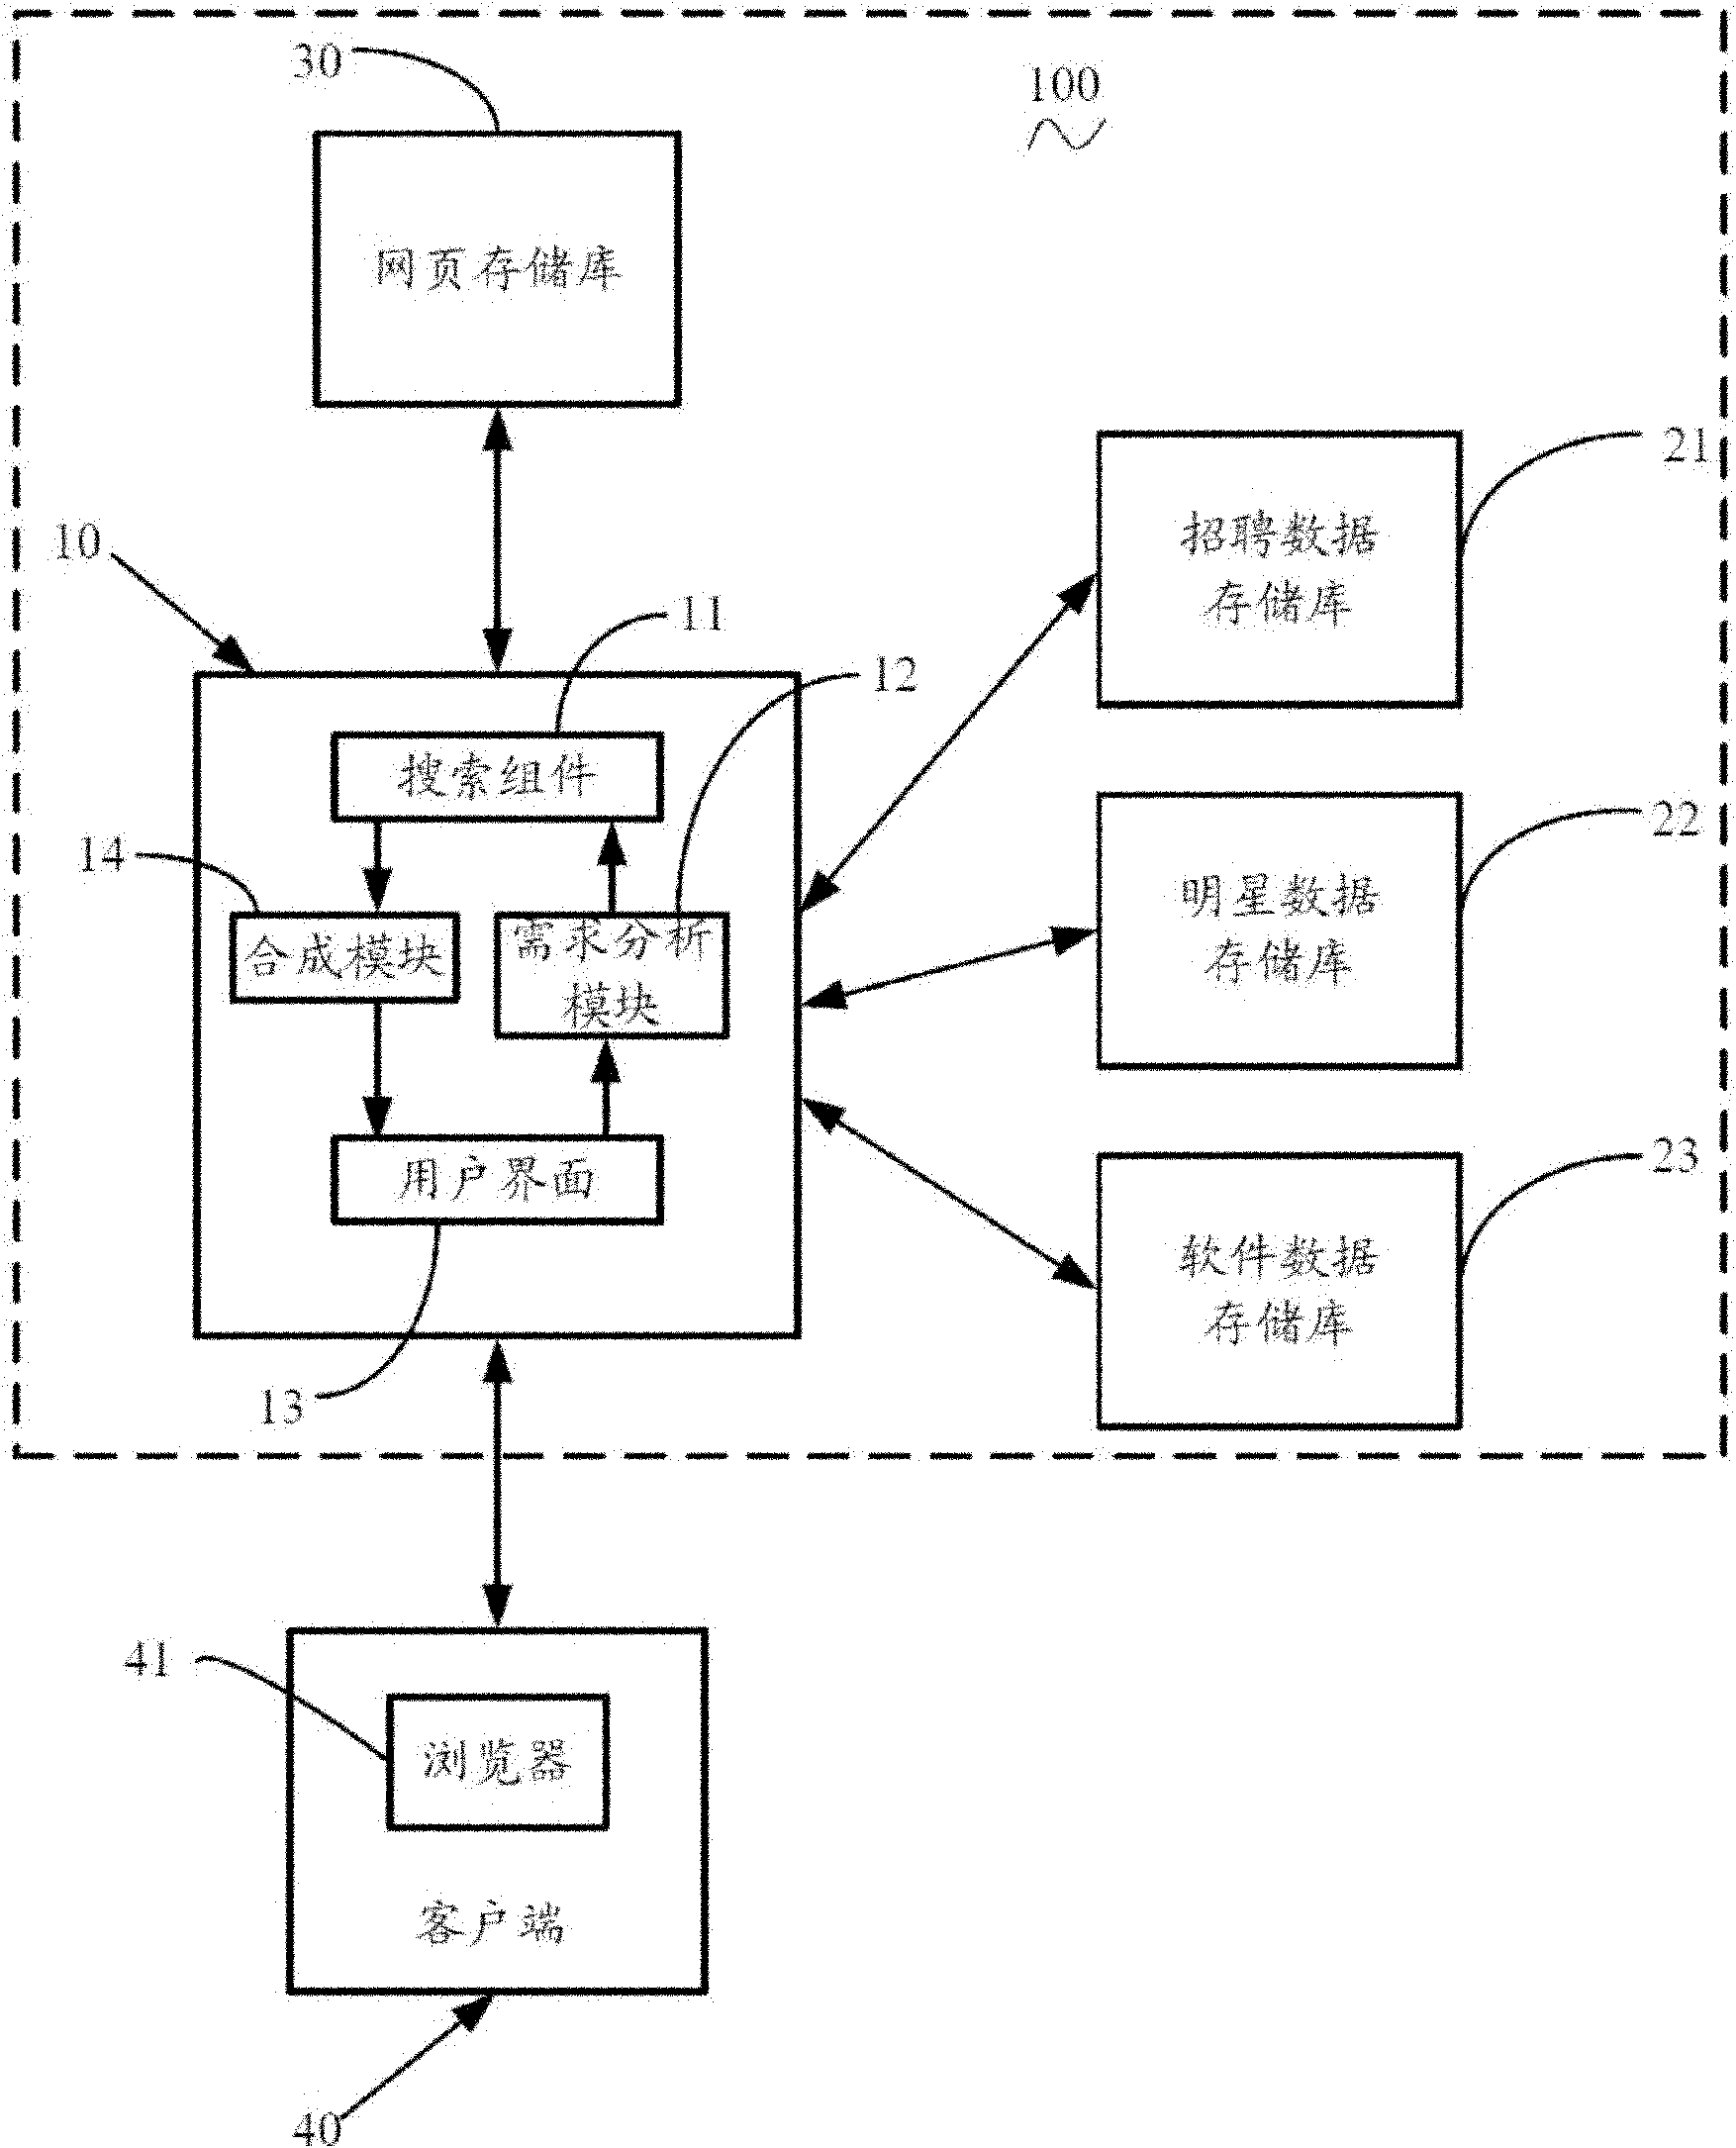 Method for searching structured data and search engine system for implementing same